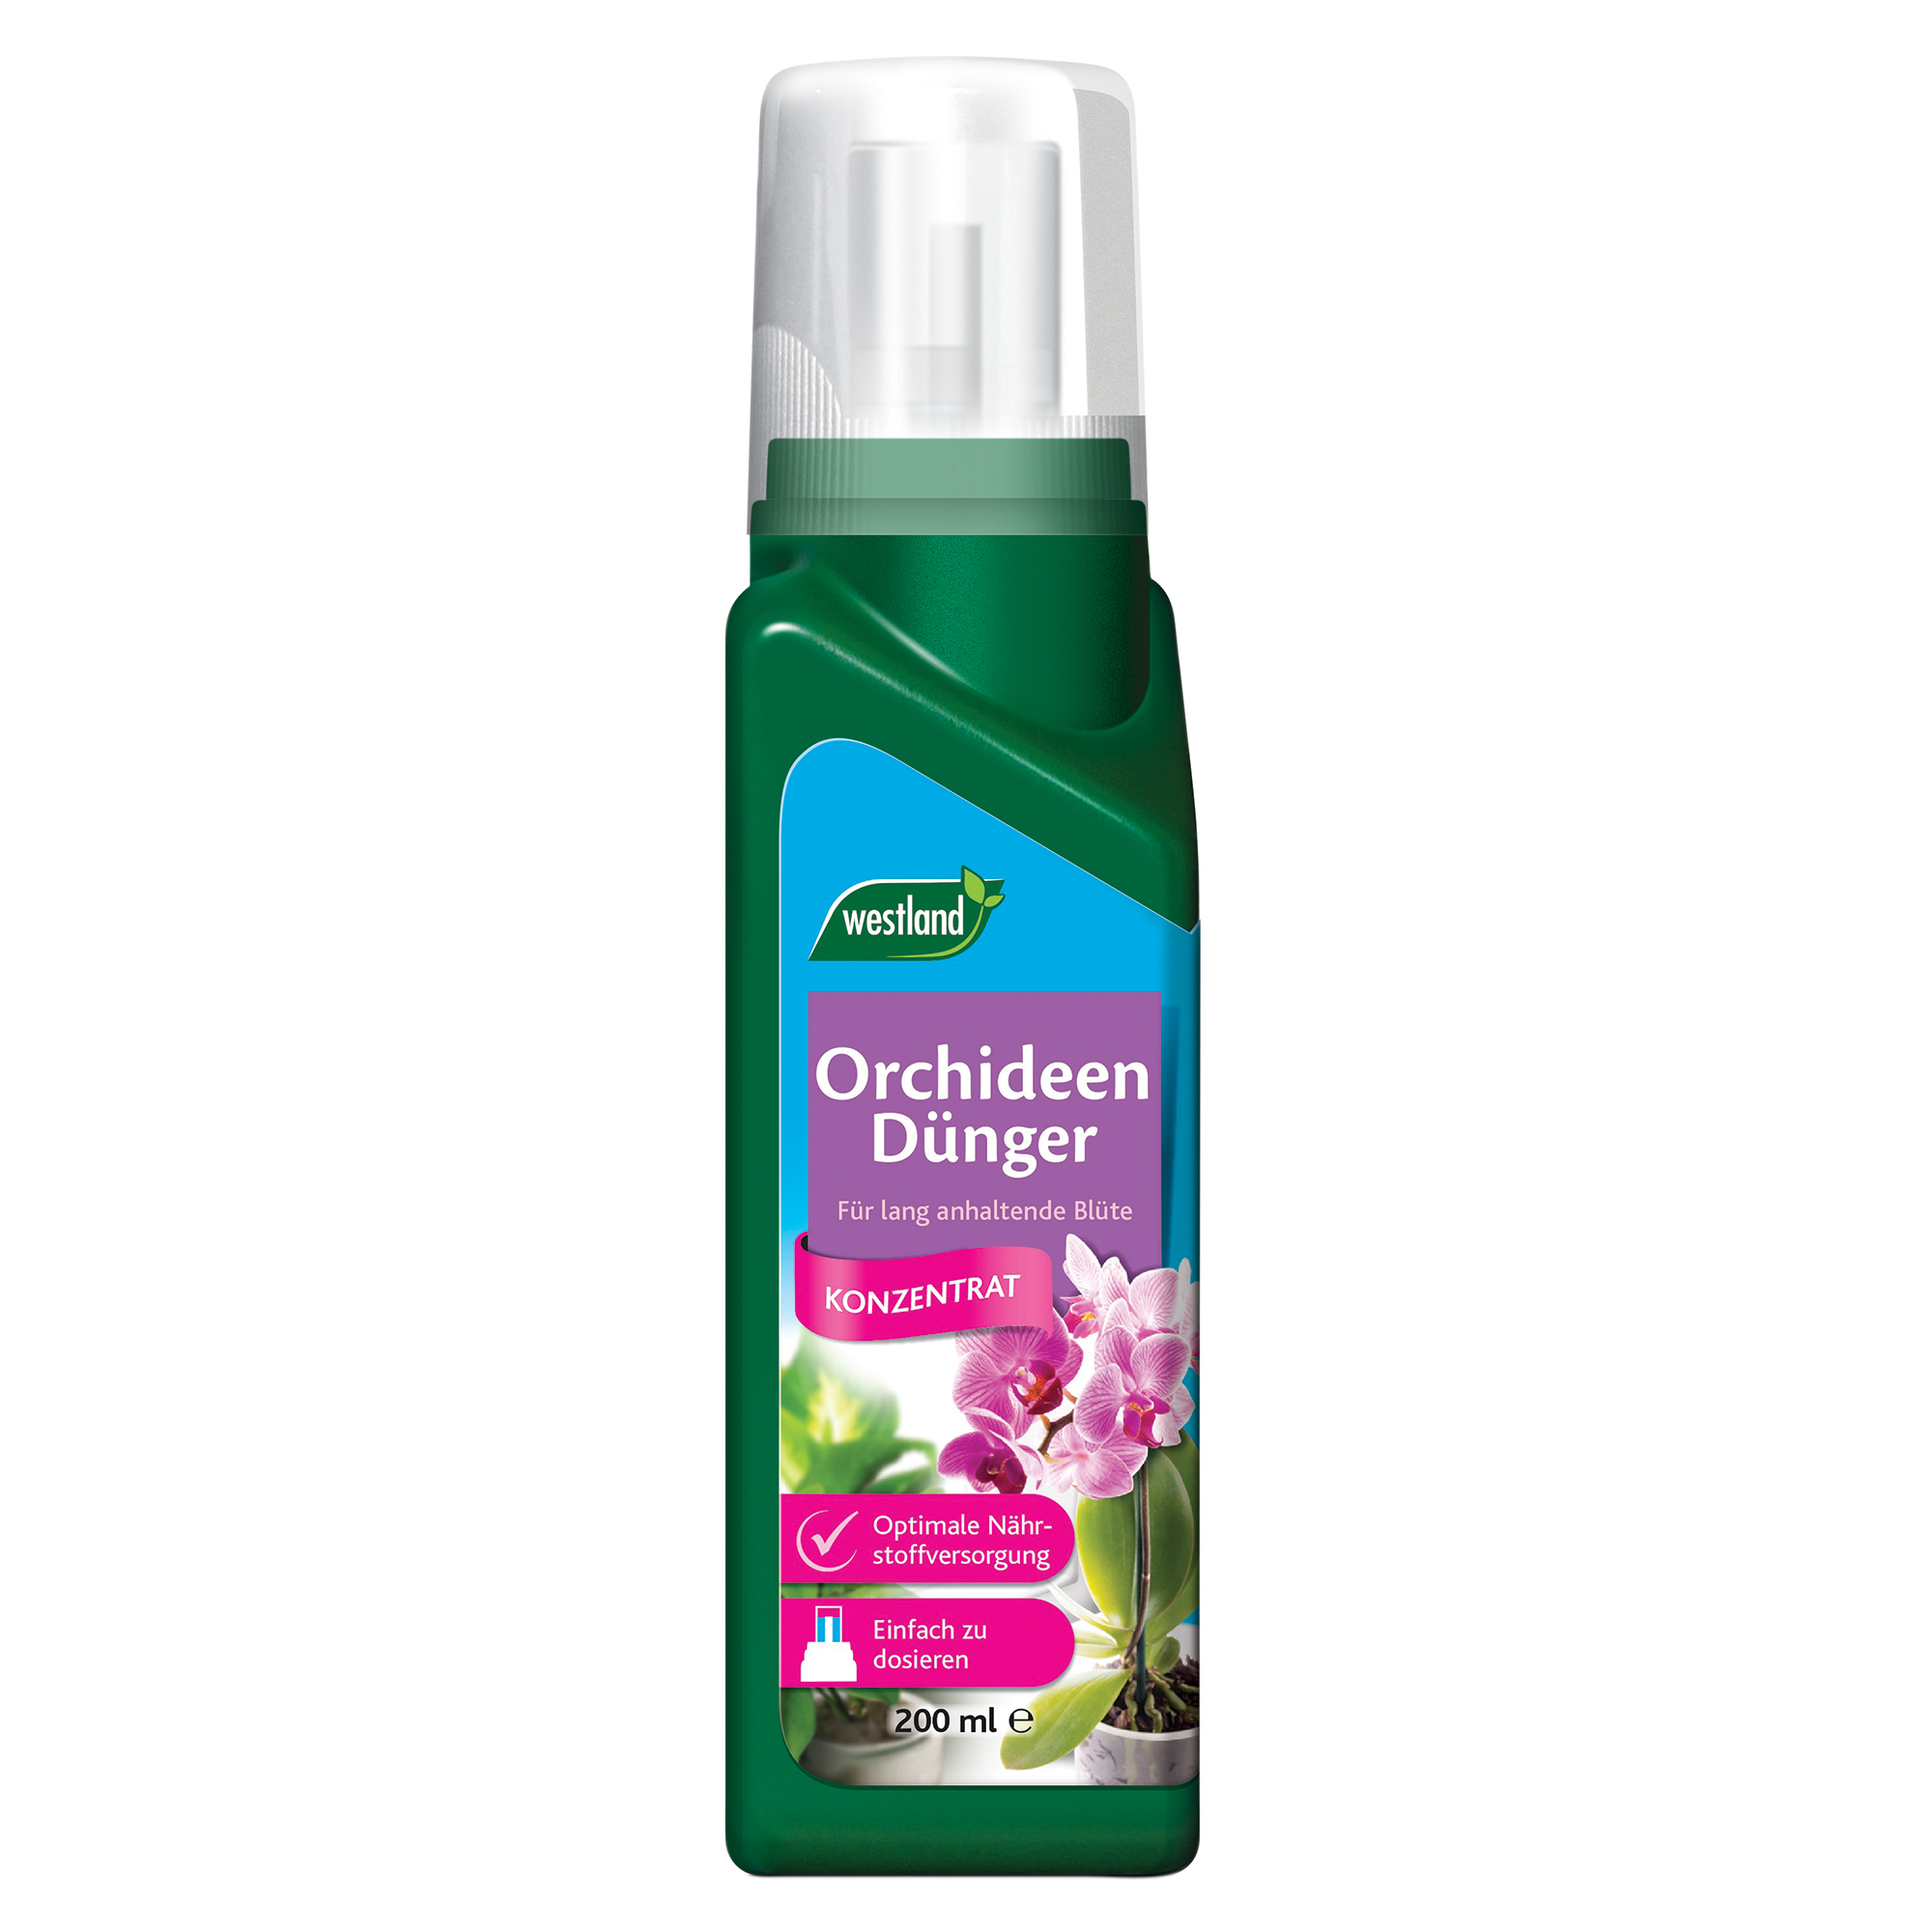 Orchideen Dünger 200 ml + product picture